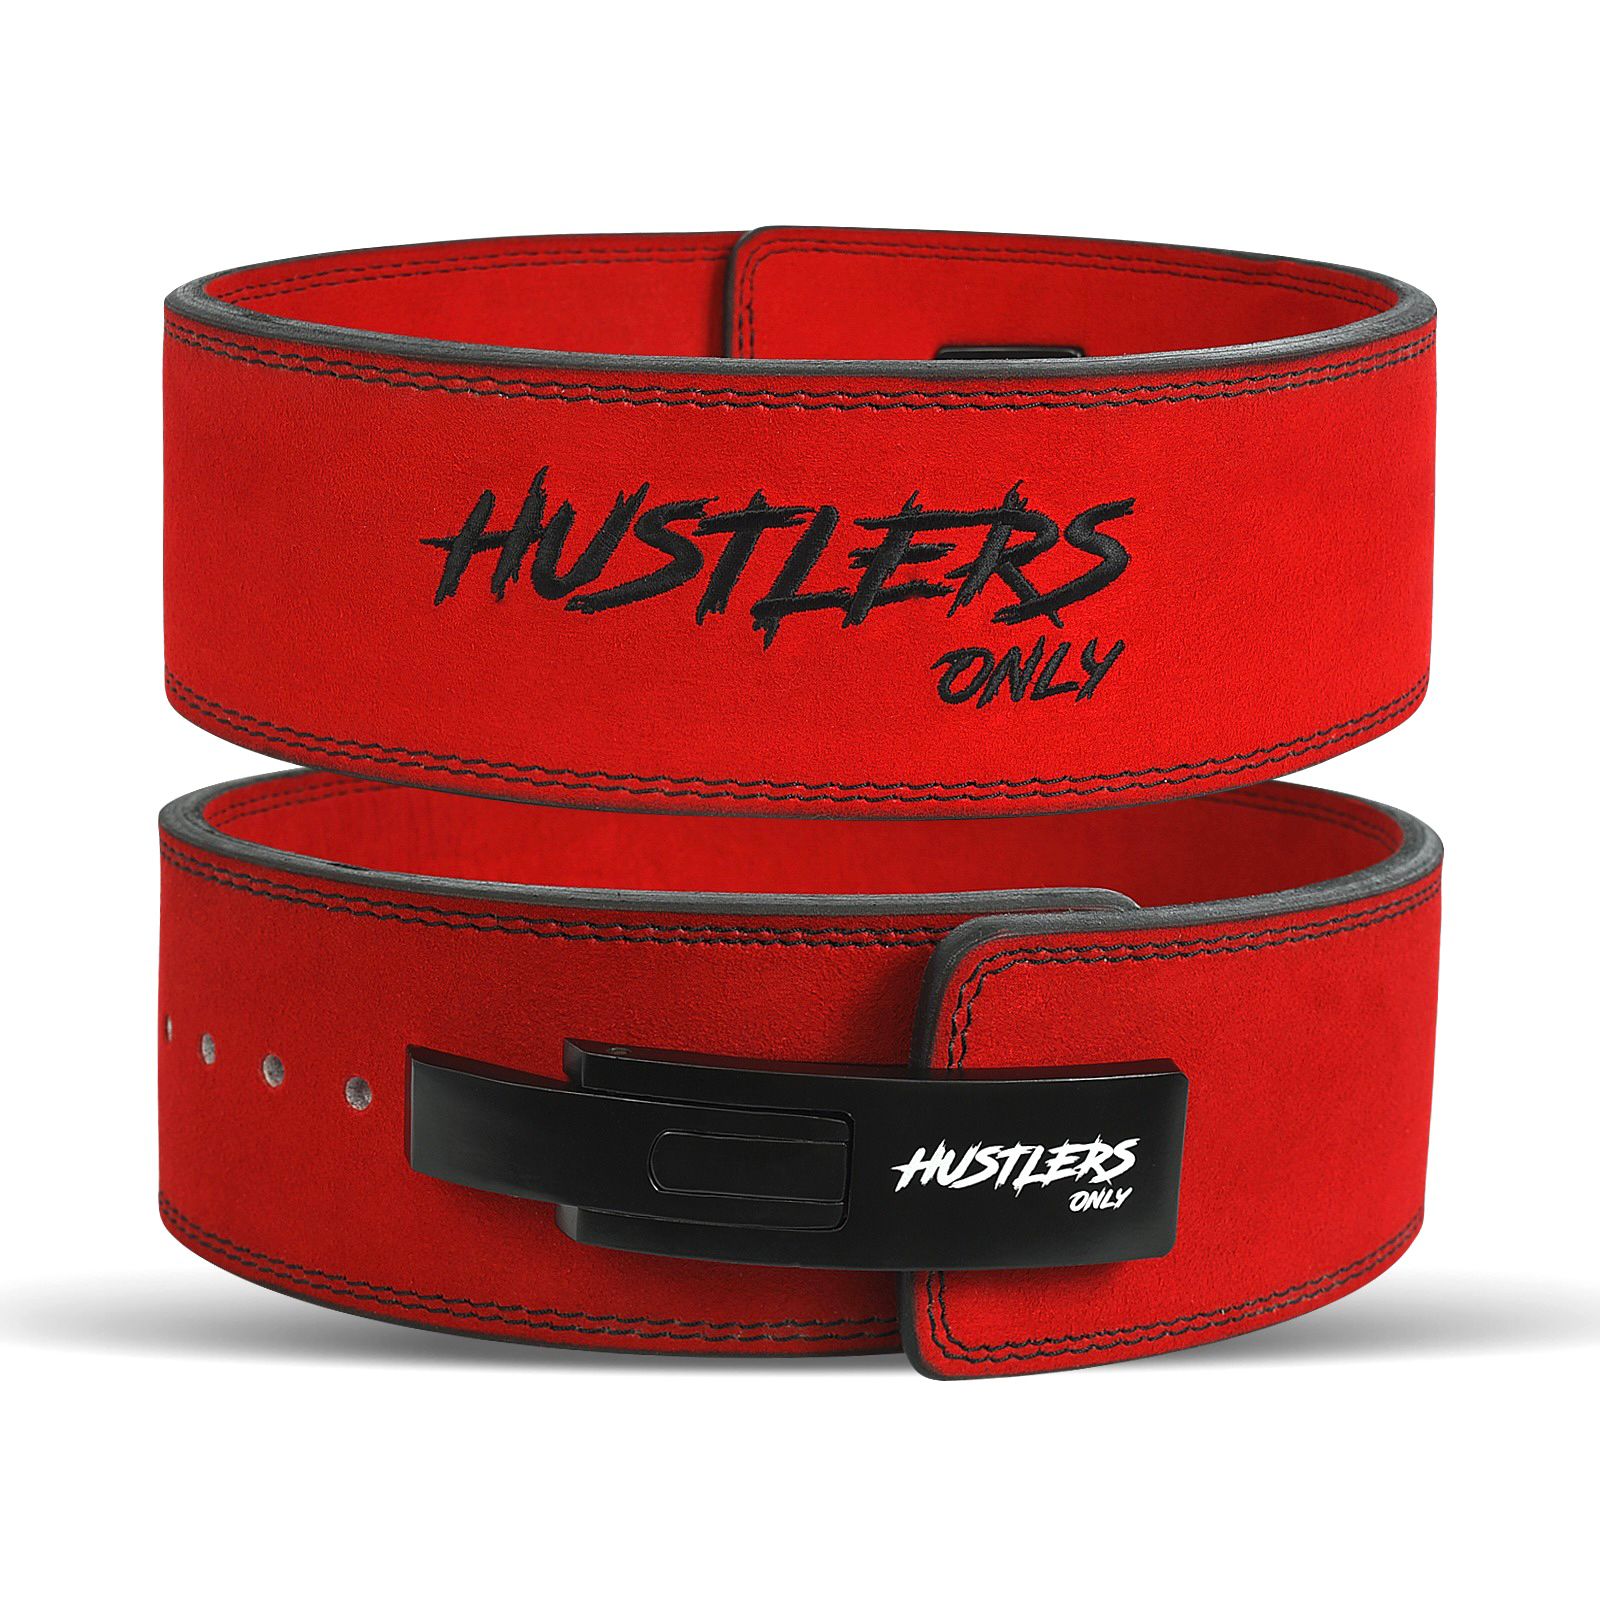 Premium Weight Lifting Belts  Leather and Nylon Belts - HUSTLERS ONLY PK